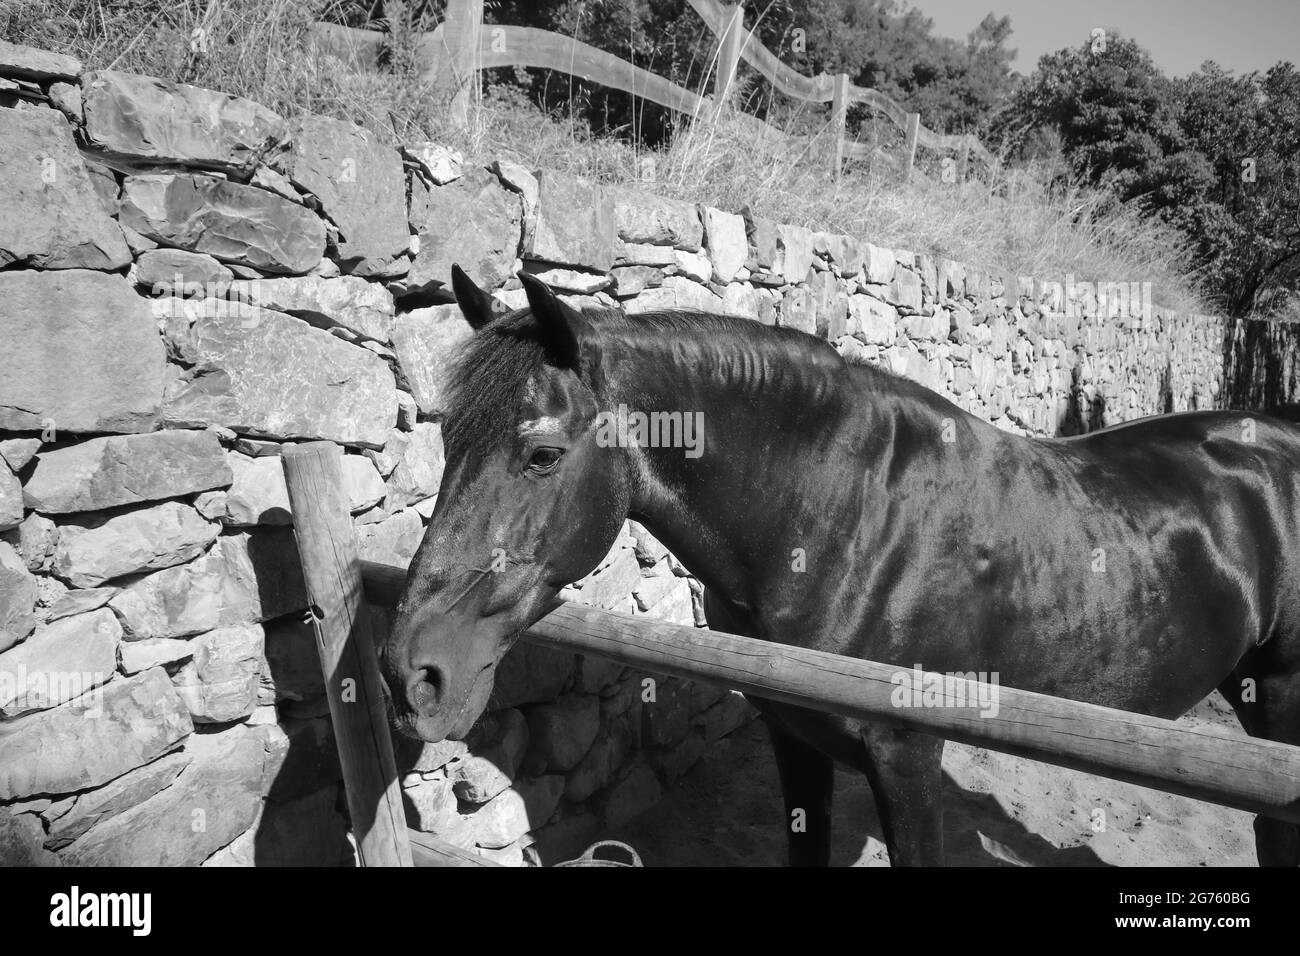 Amazing black horse in a stable Stock Photo